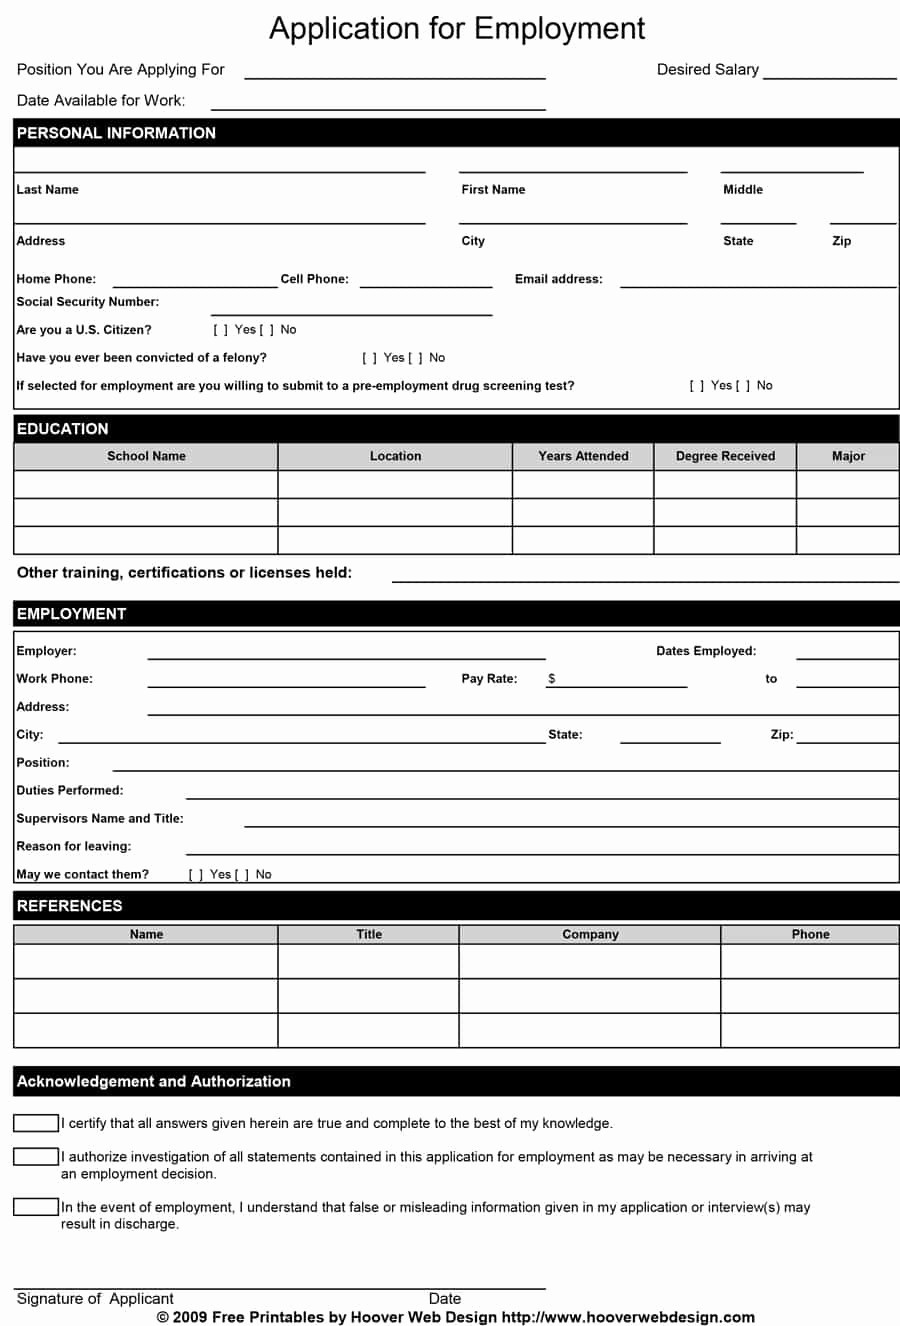 Free Employment Application form Download Best Of 50 Free Employment Job Application form Templates